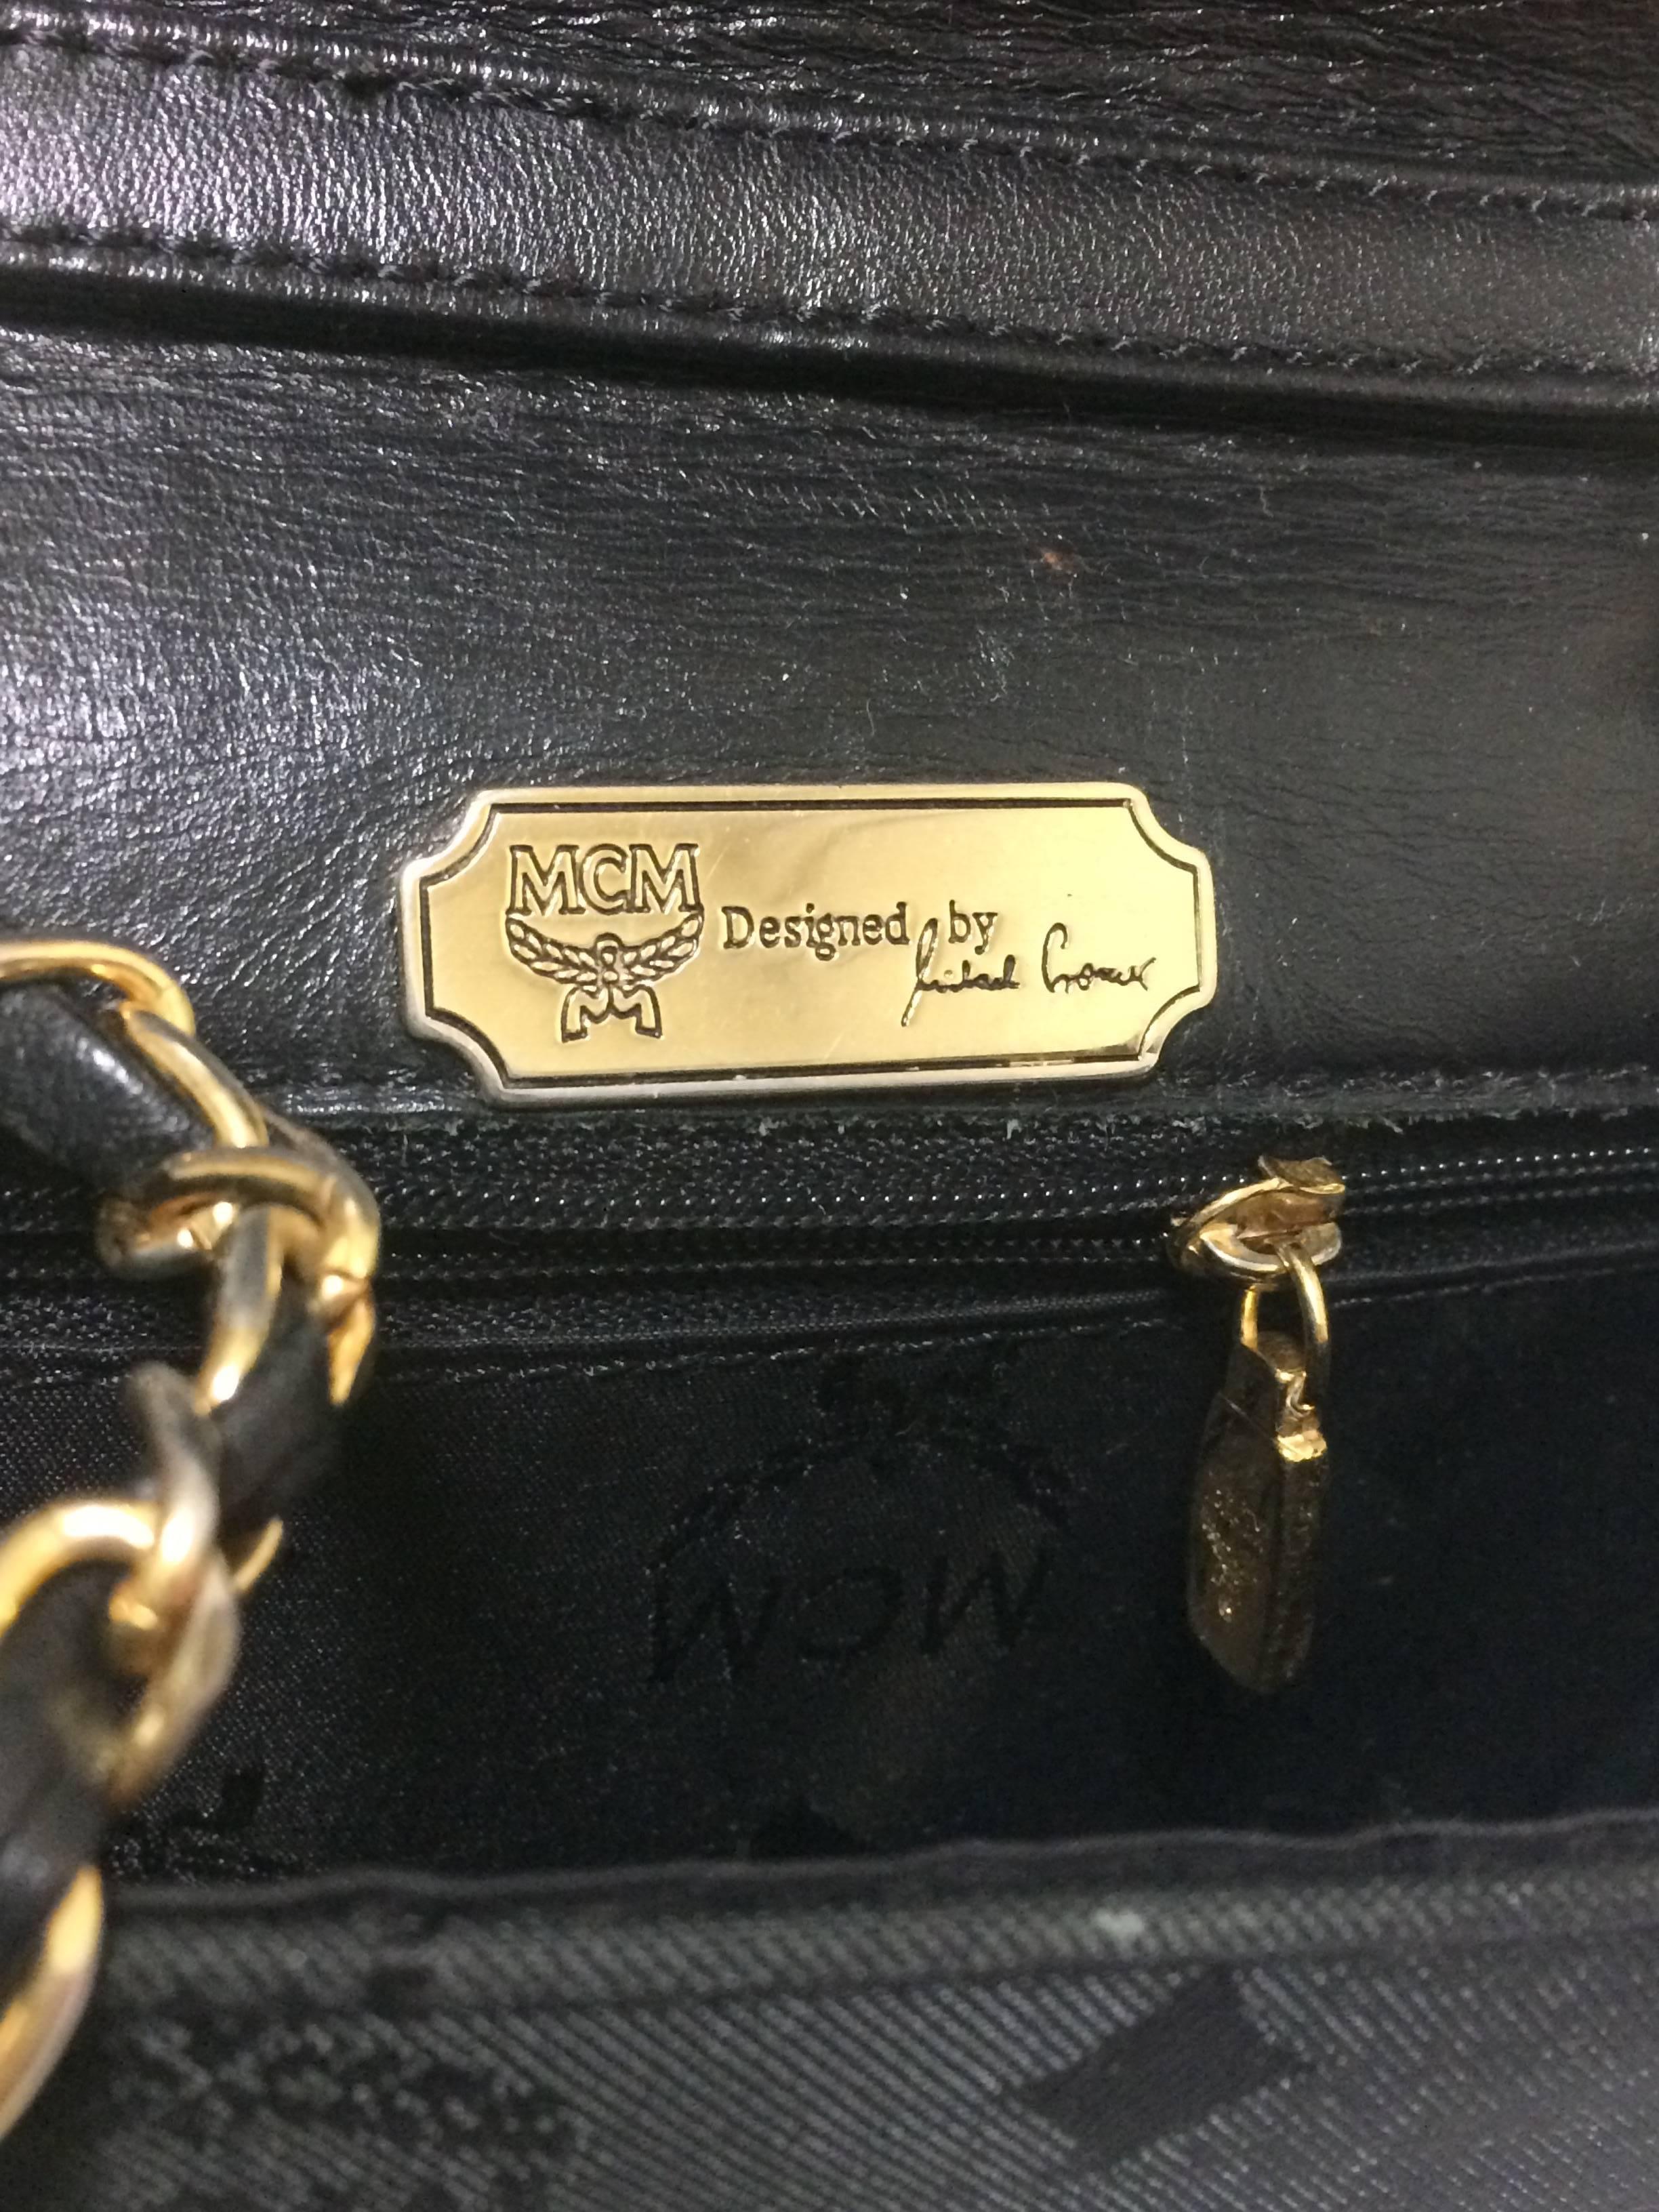 Vintage MCM black nylon monogram rare clutch shoulder bag with leather trimmings In Good Condition For Sale In Kashiwa, Chiba